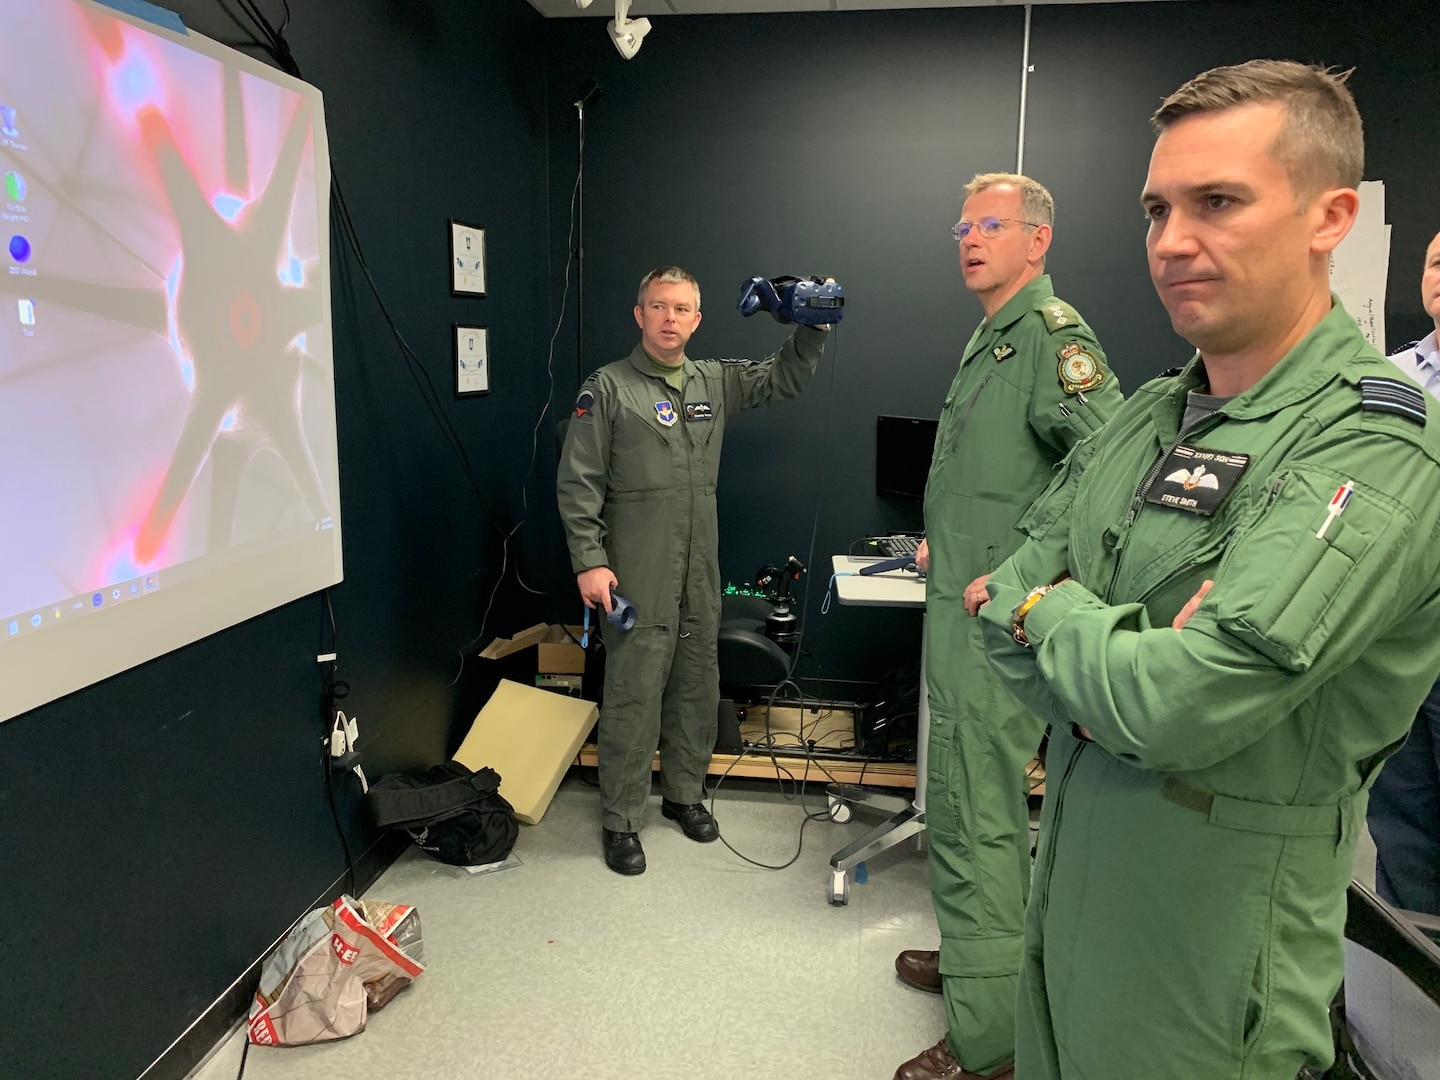 Royal Air Force Flight Lt. Darren French, Pilot Training Next 2.0 instructor pilot and the RAF's senior national representative, highlights virtual-reality headset capabilities to British Army Col. Paddy Logan (center), assistant director for flying training for RAF Headquarters 22 Group, and RAF Squadron Leader Steve Smith (left) at the PTN facility at the Armed Forces Reserve Center in Austin, Texas, March 18. The RAF have both a student-pilot and an instructor pilot participating in the class as they look to introduce PTN lessons learned into their flying training pipeline.